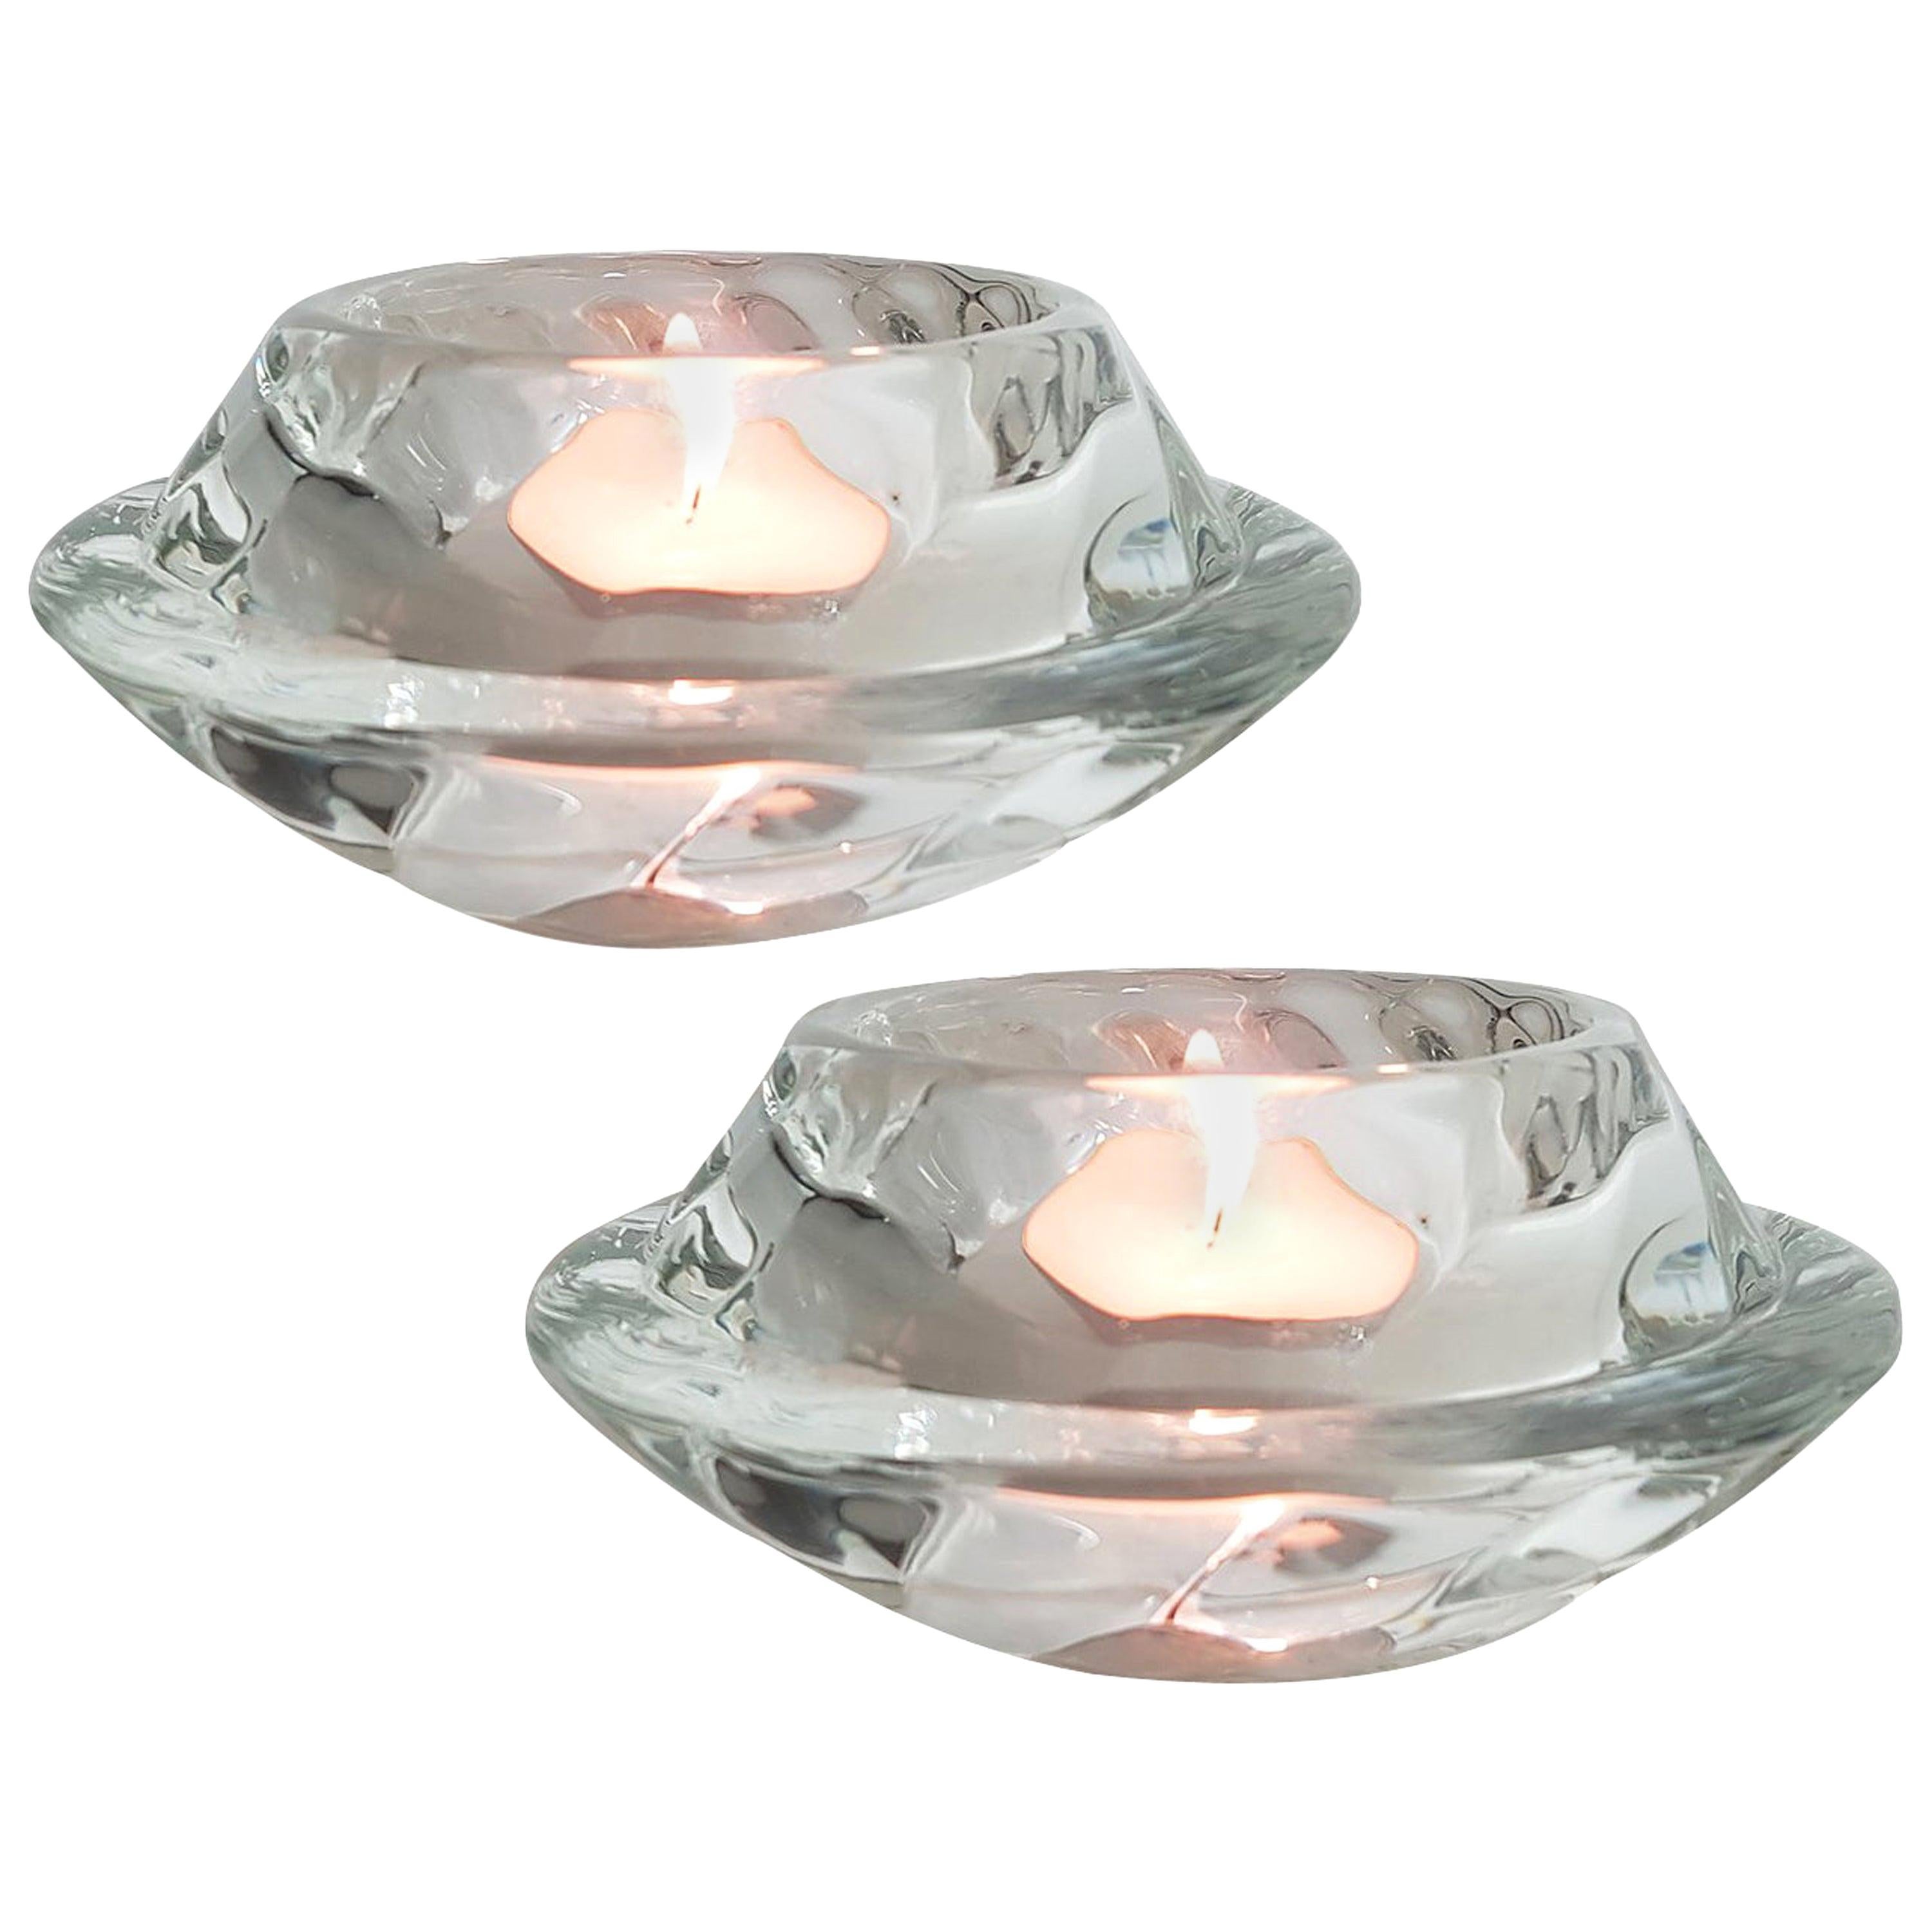 Pair of Crystal Glass Votive Candleholders by Royal Copenhagen